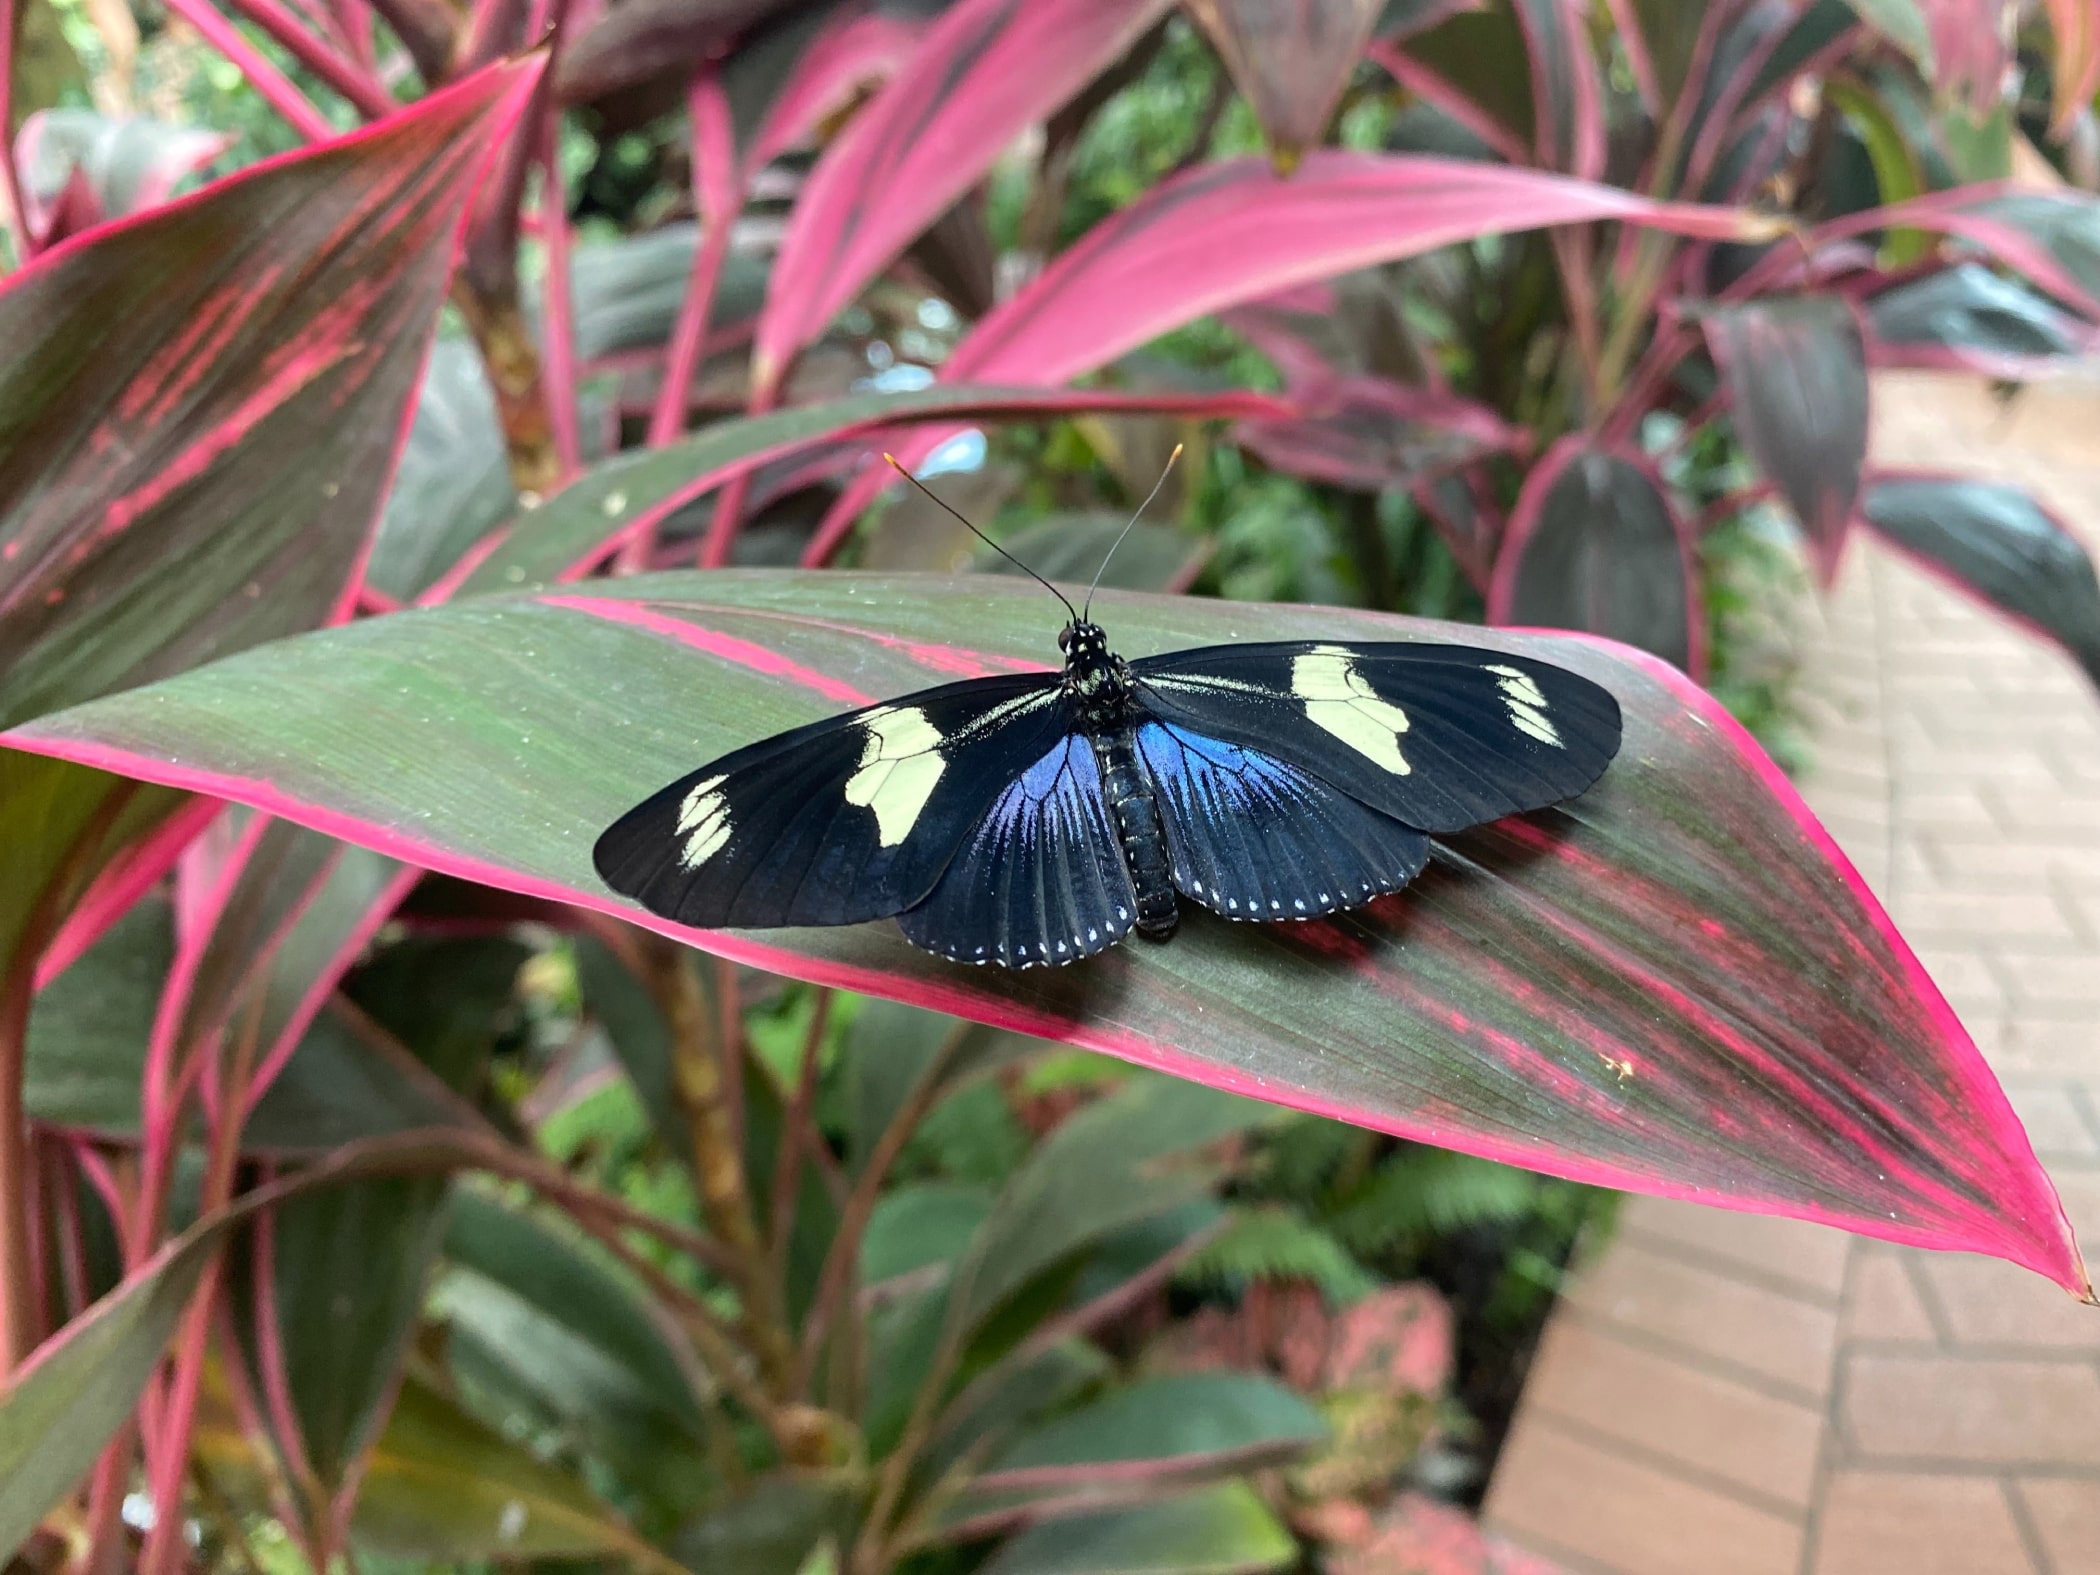 Visiting Key West Butterfly and Nature Conservatory is one of the most fun things to do in Florida